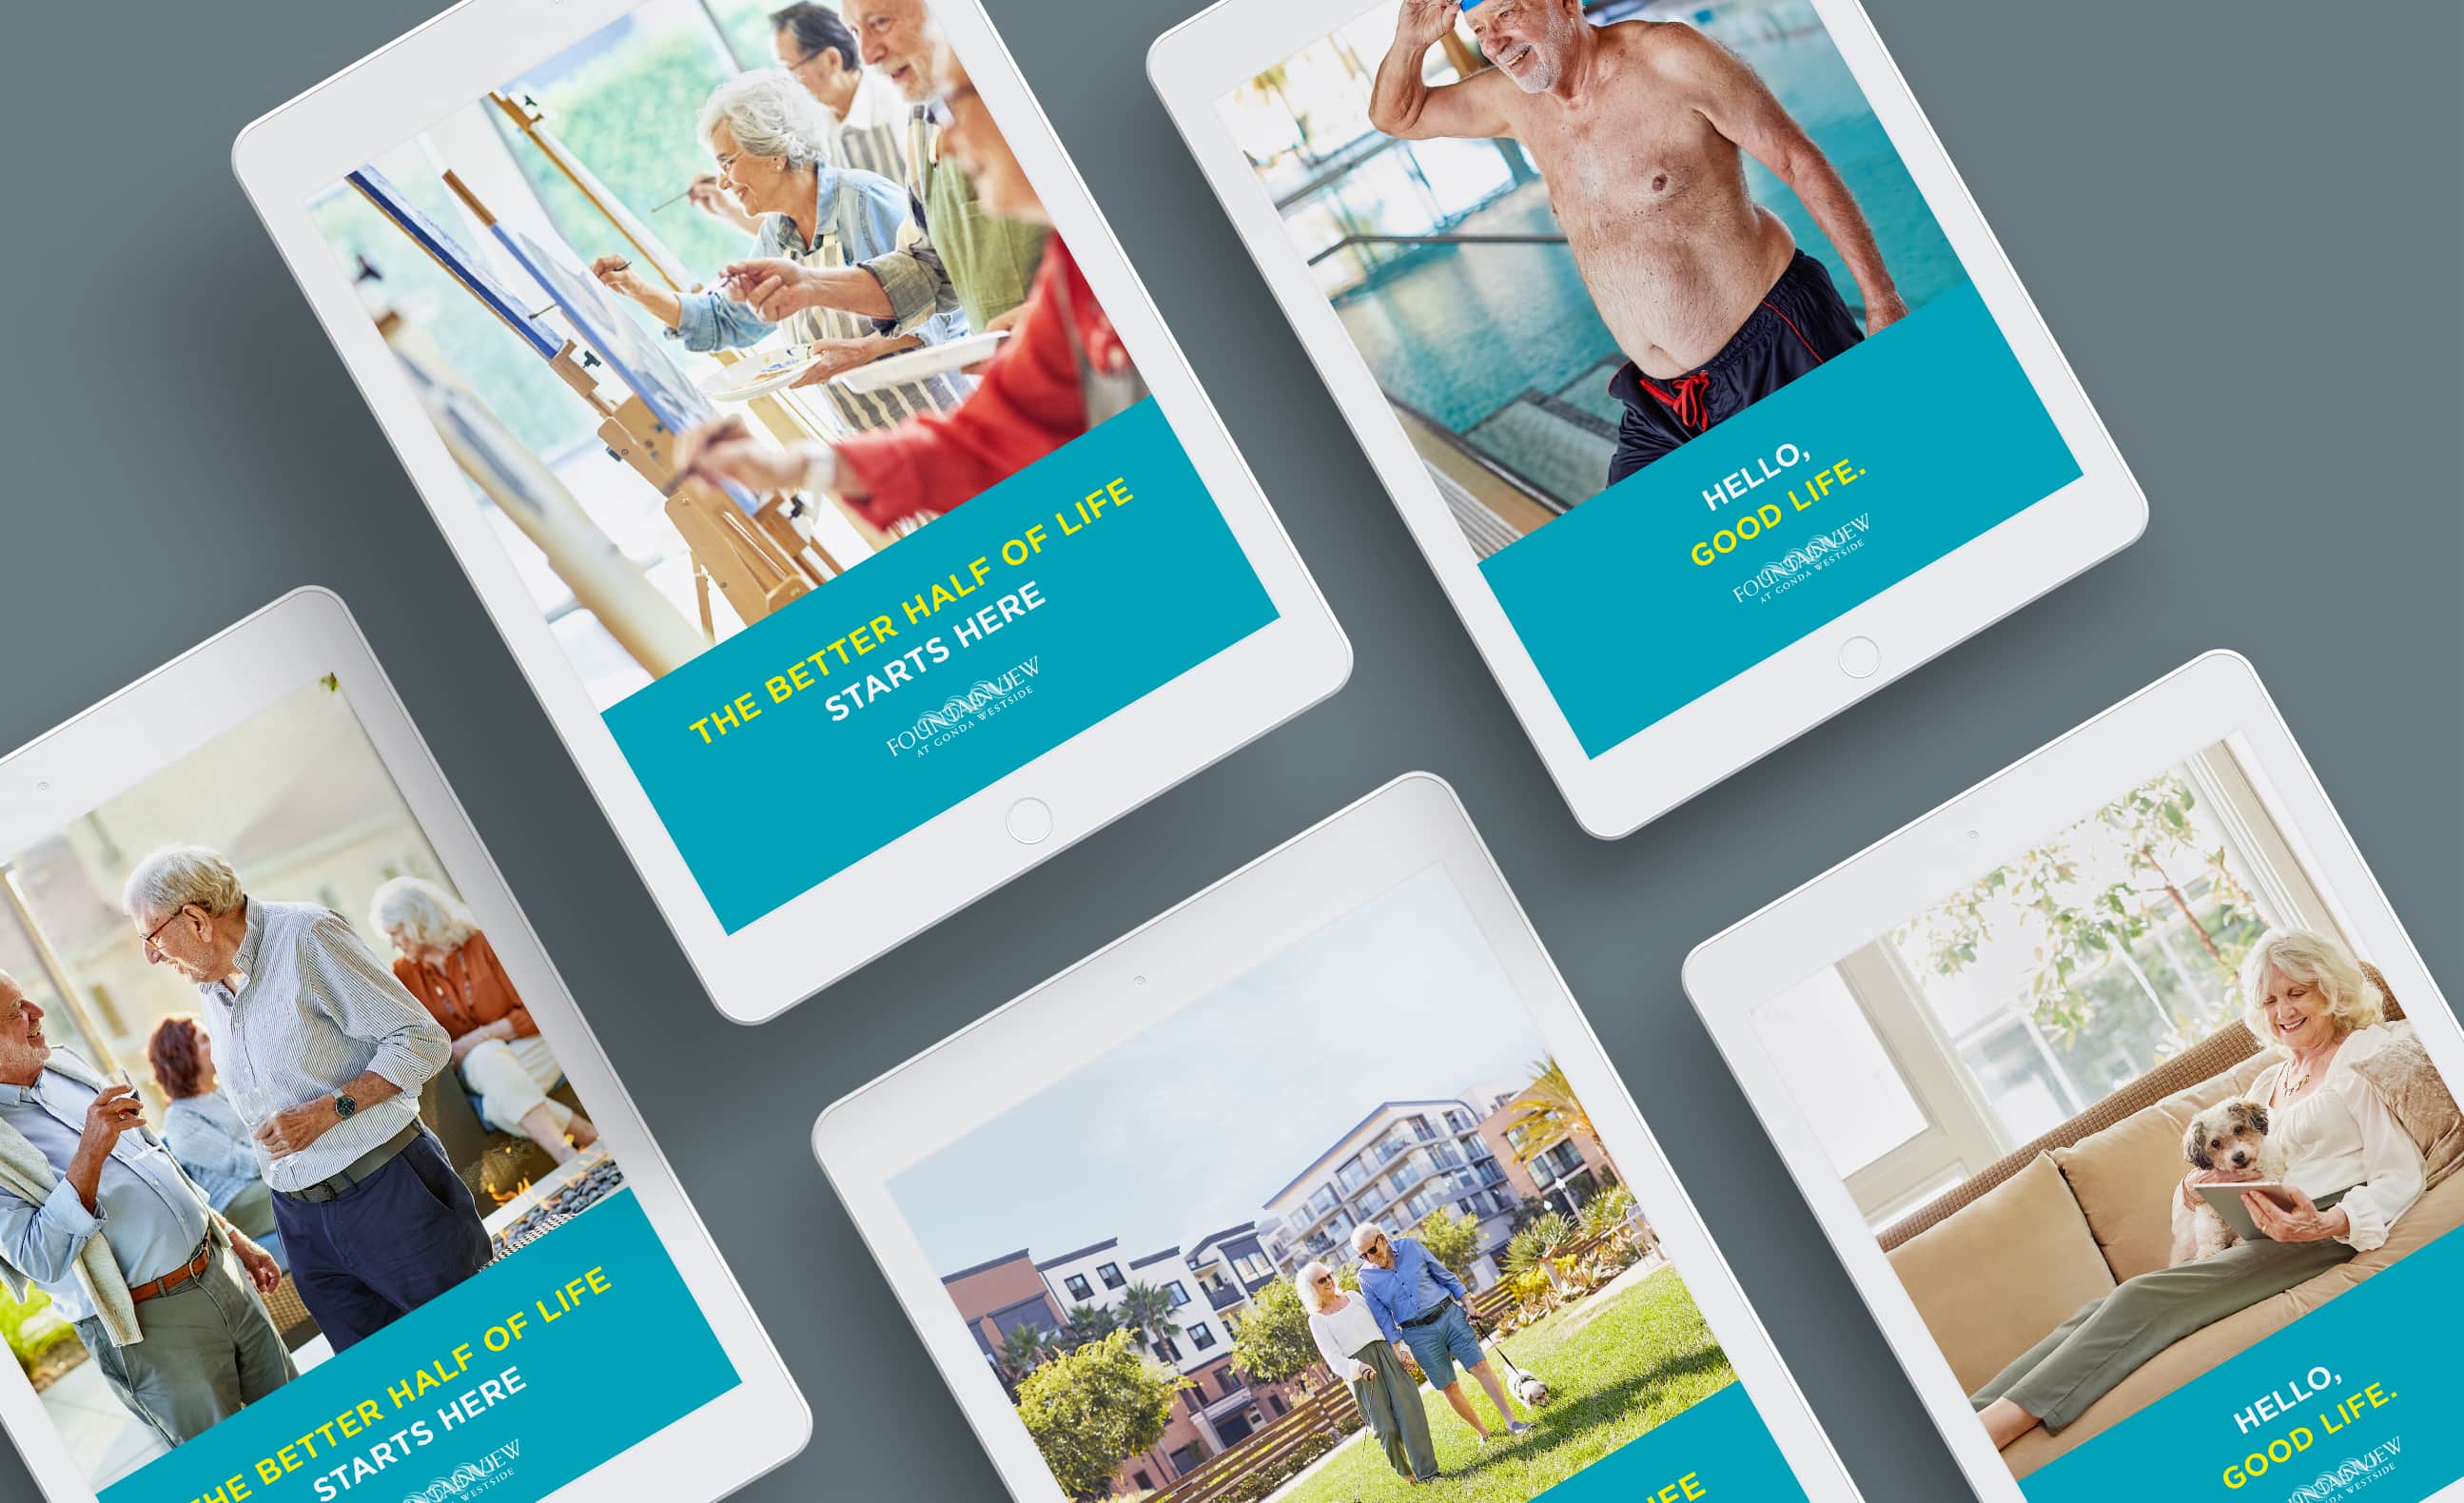 Three tablets arranged side by side, each displaying a different part of a retirement community's marketing material with slogans like 'THE BETTER HALF OF LIFE STARTS HERE' and images of senior activities and accommodations.